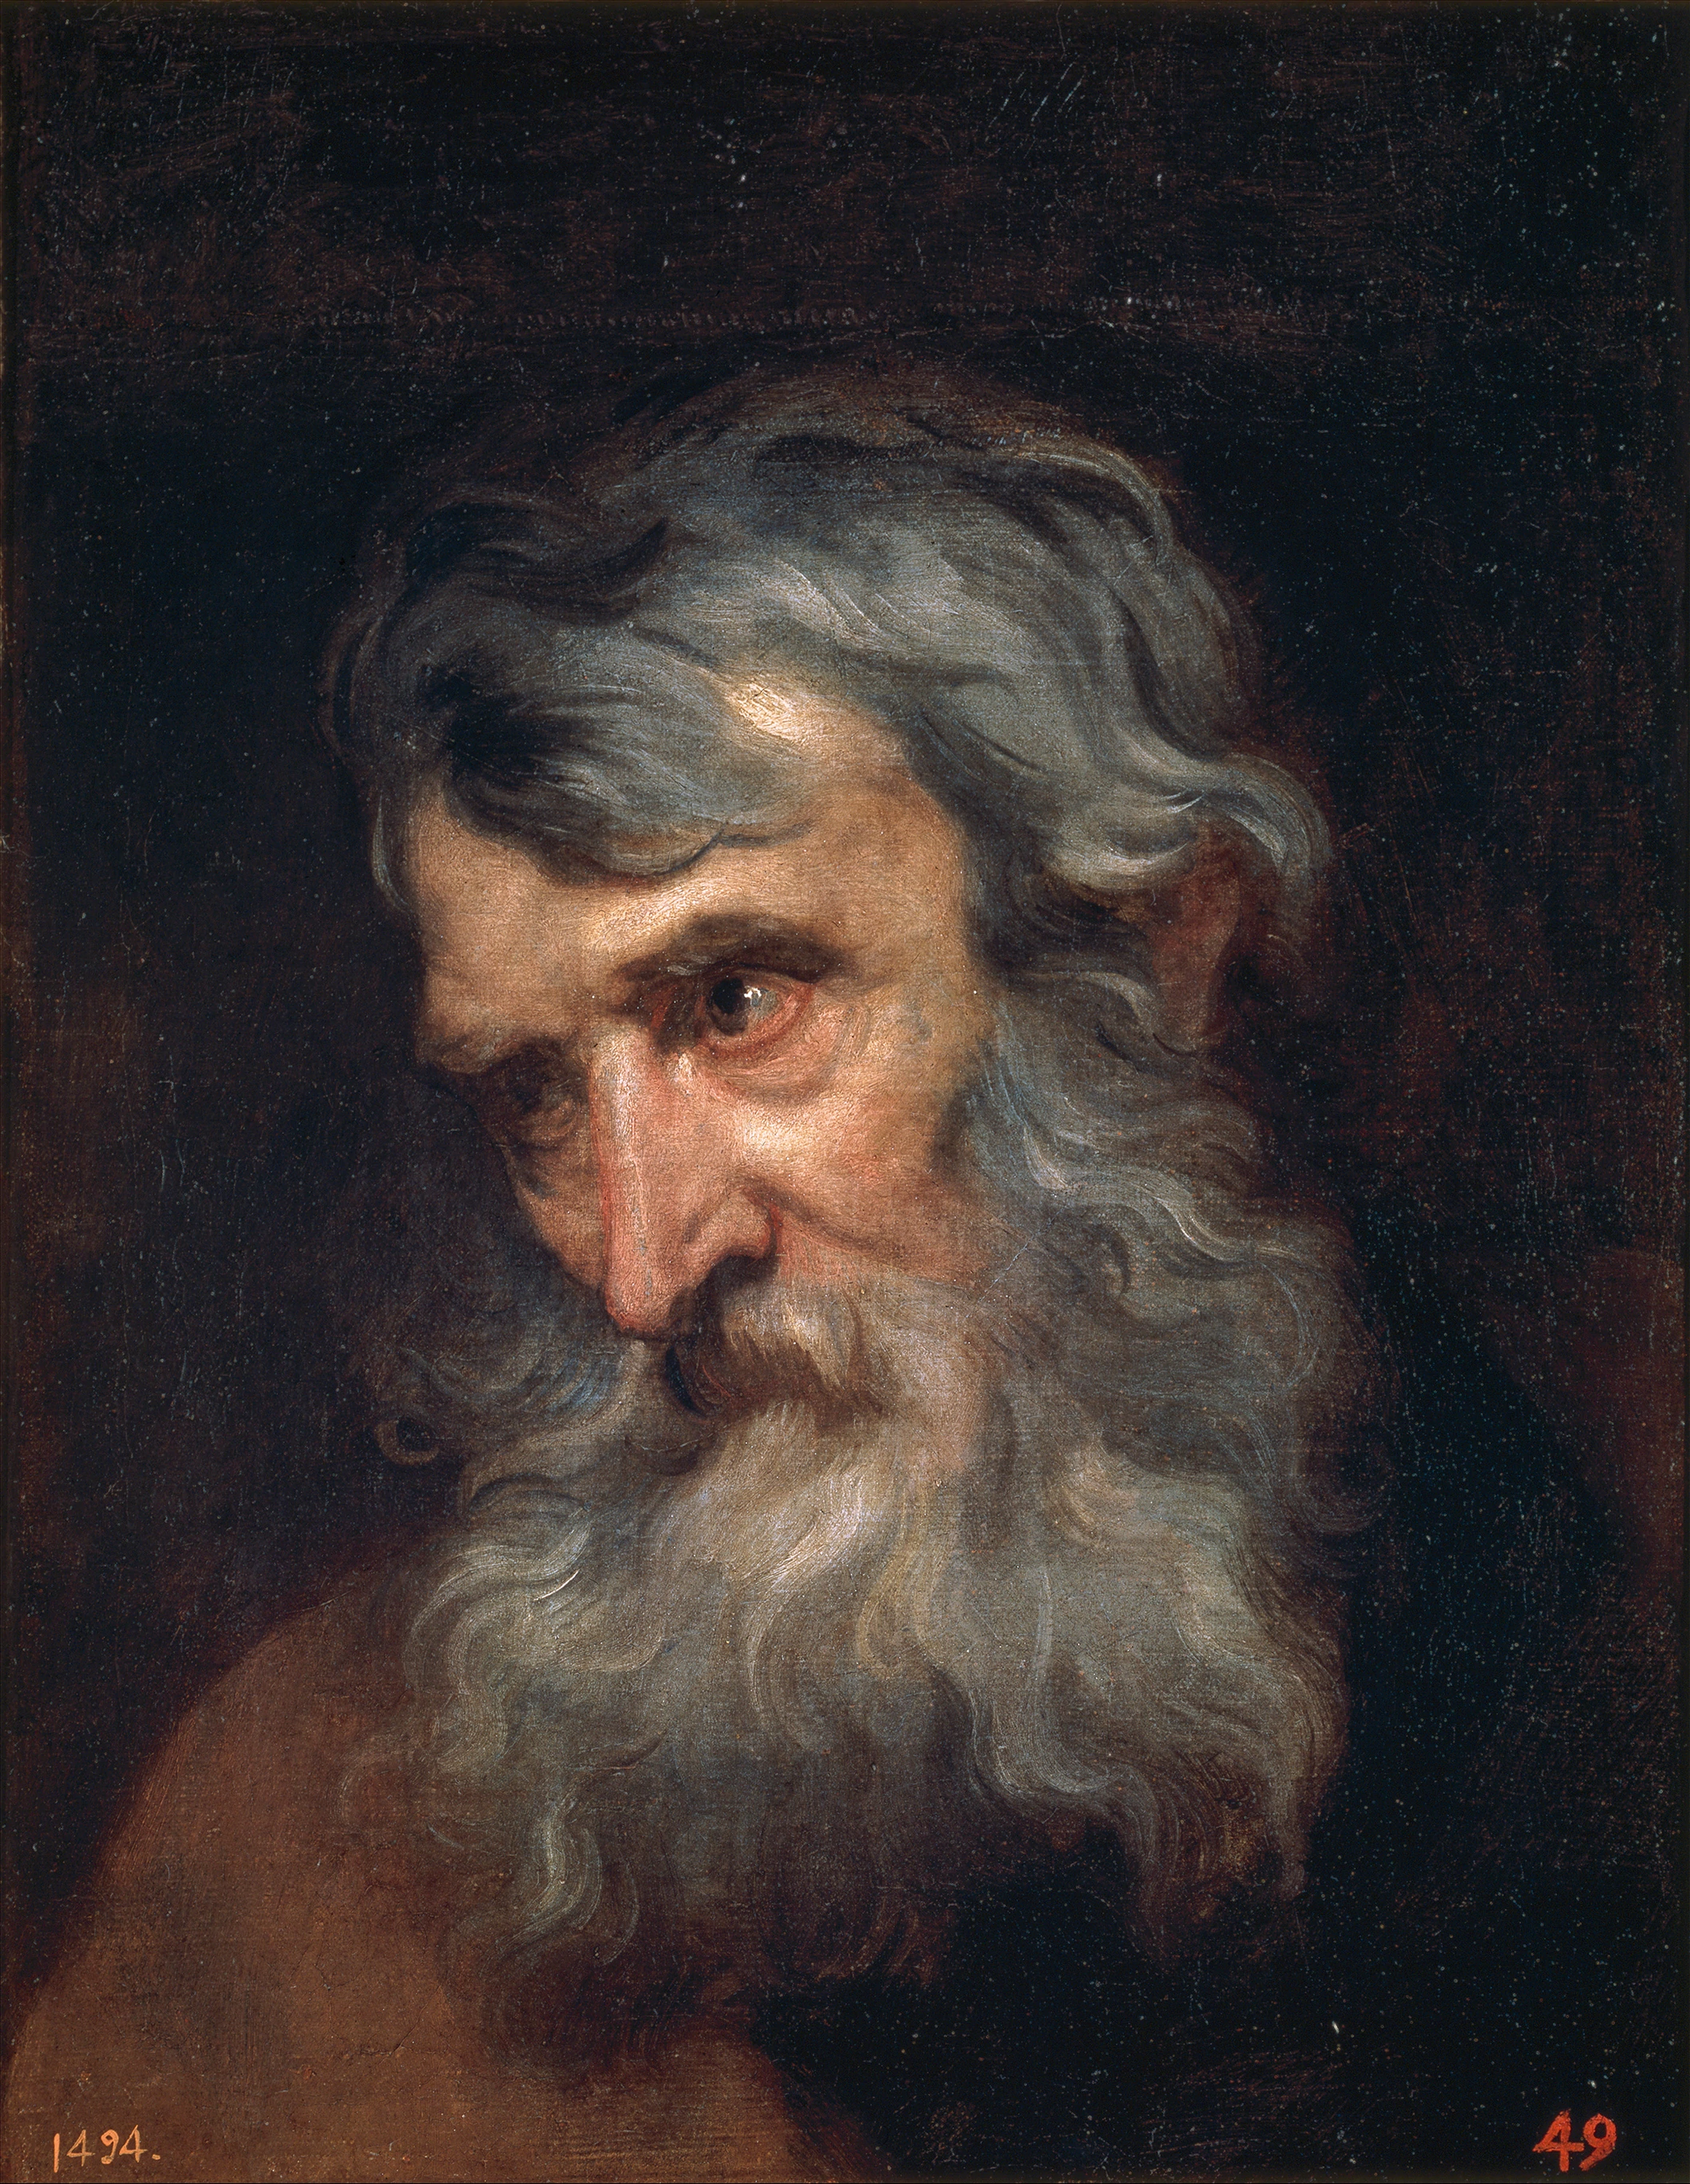 The Head of an Old Man, Anthony van Dyck